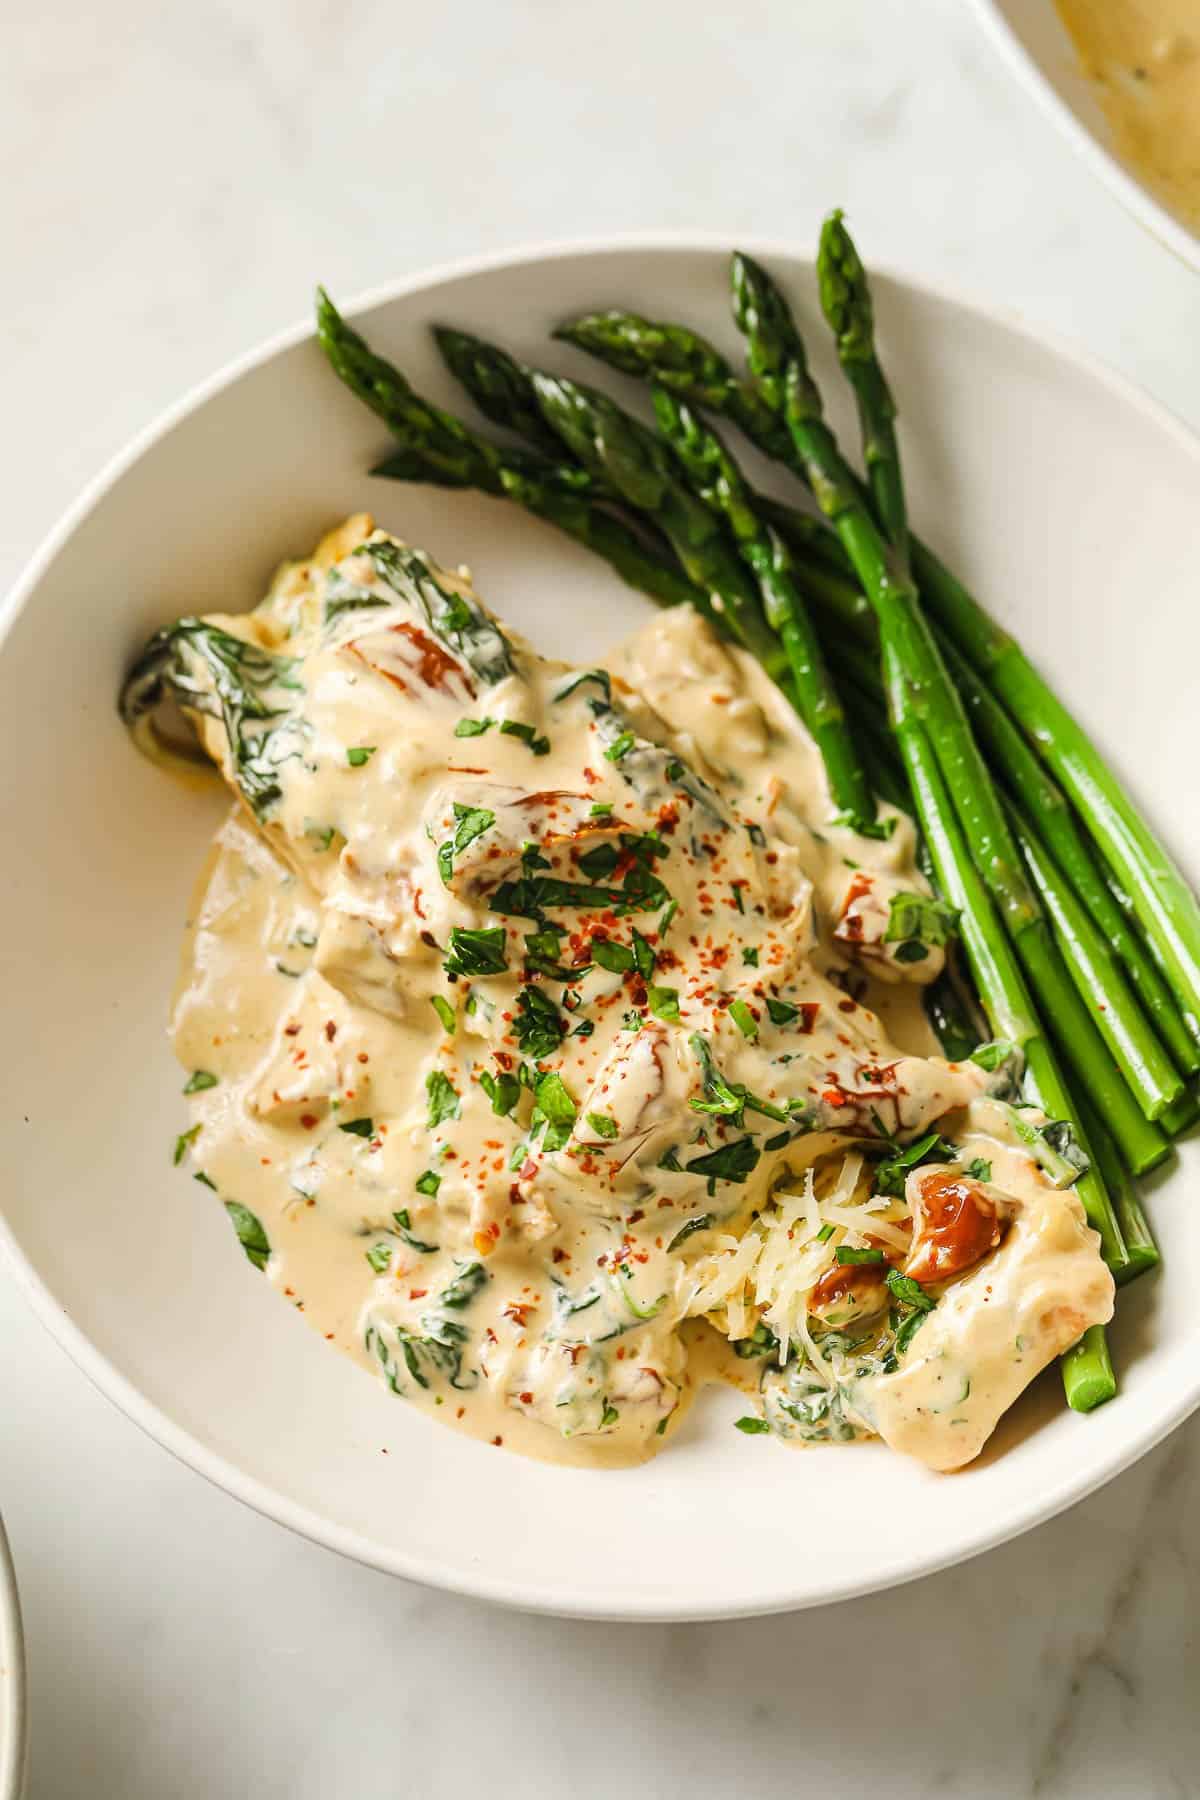 a white bowl with a portion of creamy tuscan salmon, served with steamed asparagus.